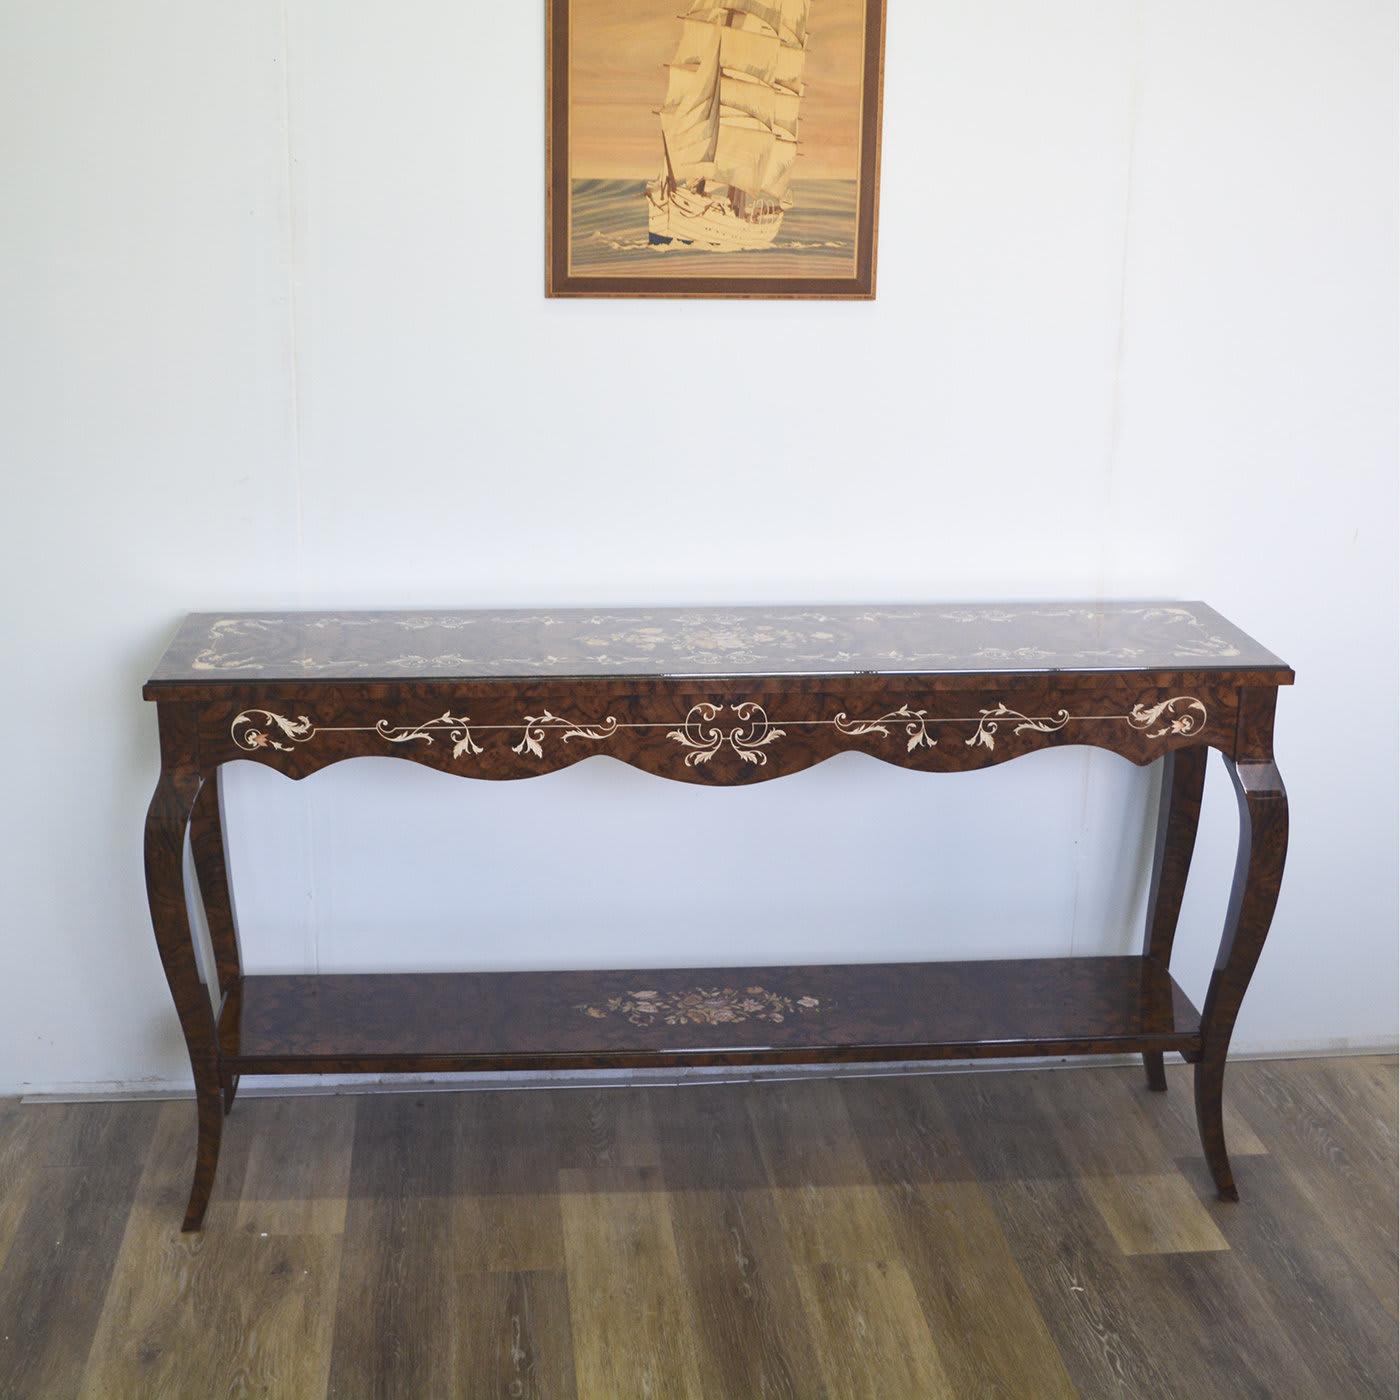 A statement piece of great artistic value, this remarkable console is entirely handcrafted of California walnut with a high-gloss finish to enhance the exquisite natural and dark-stained inlays that decorate the top, lower shelf and scalloped skirt.